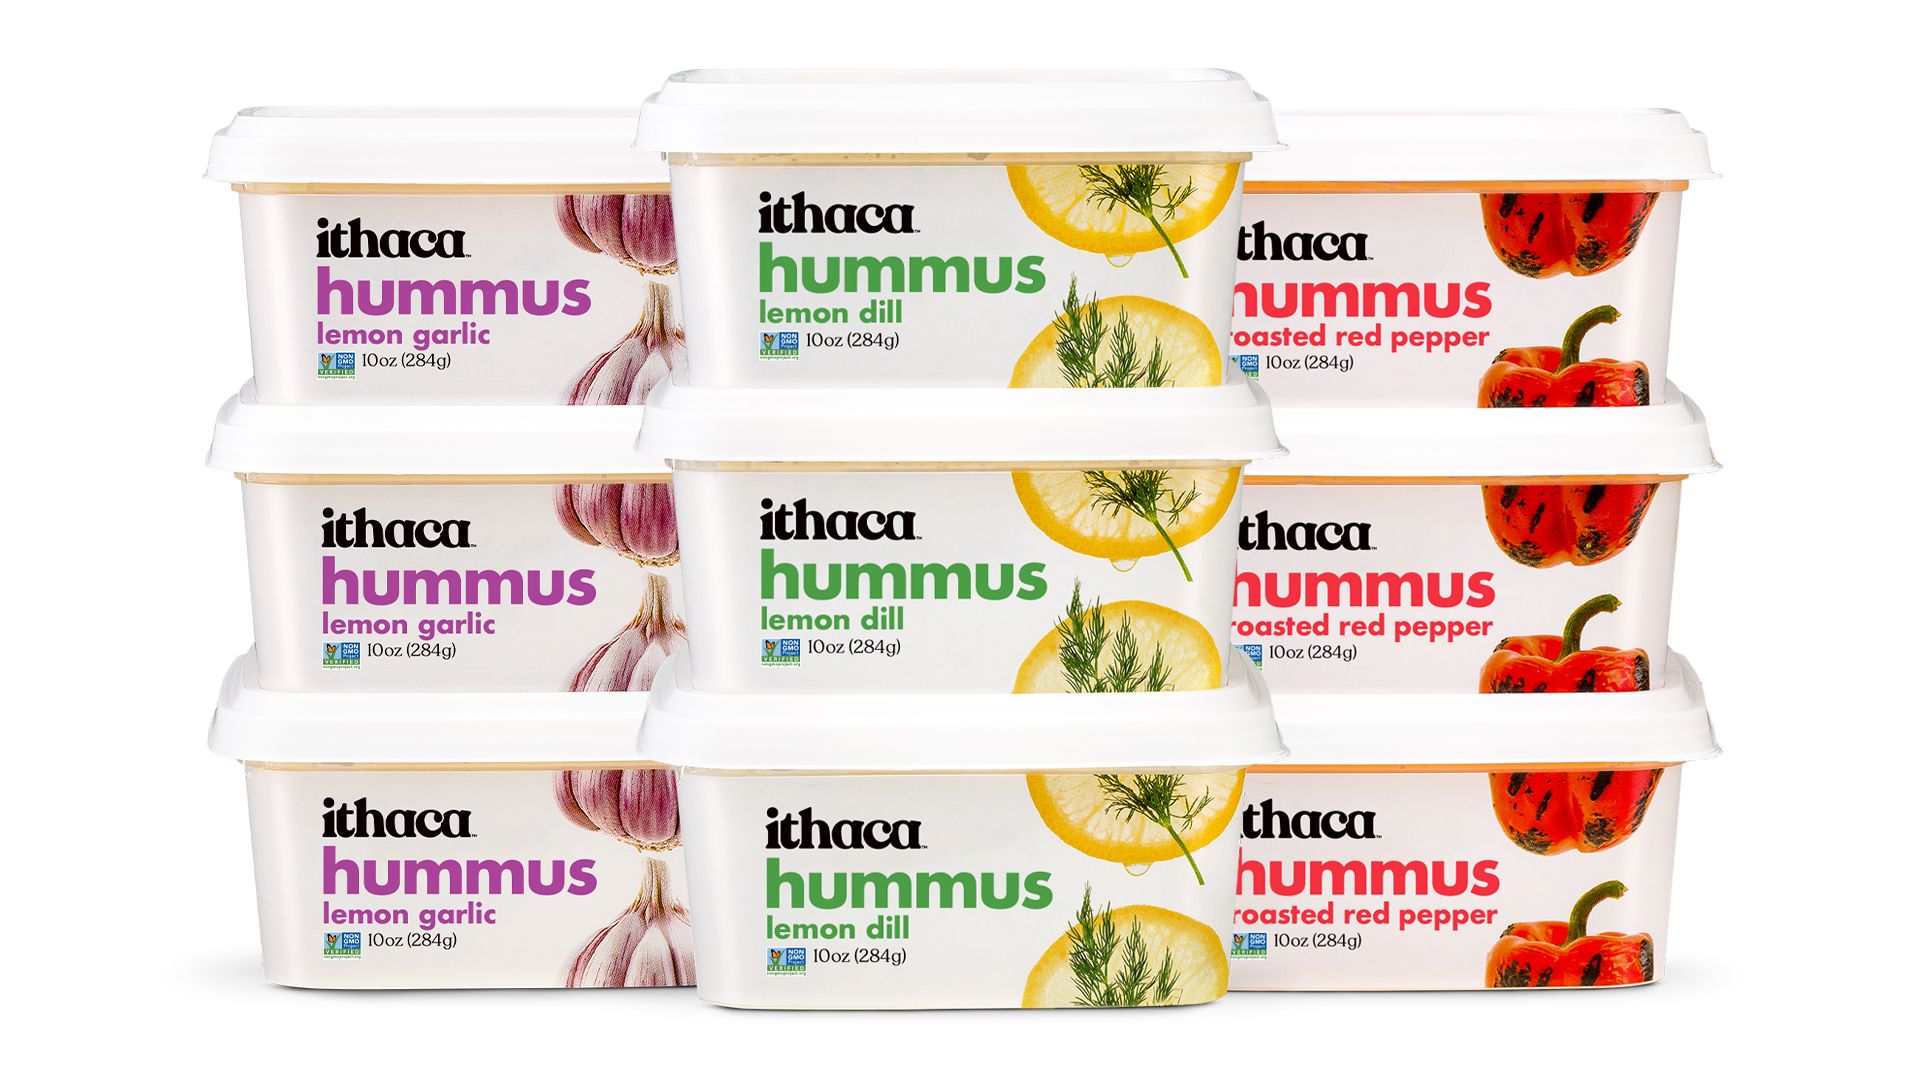 A stack of containers of Ithaca-branded hummus.